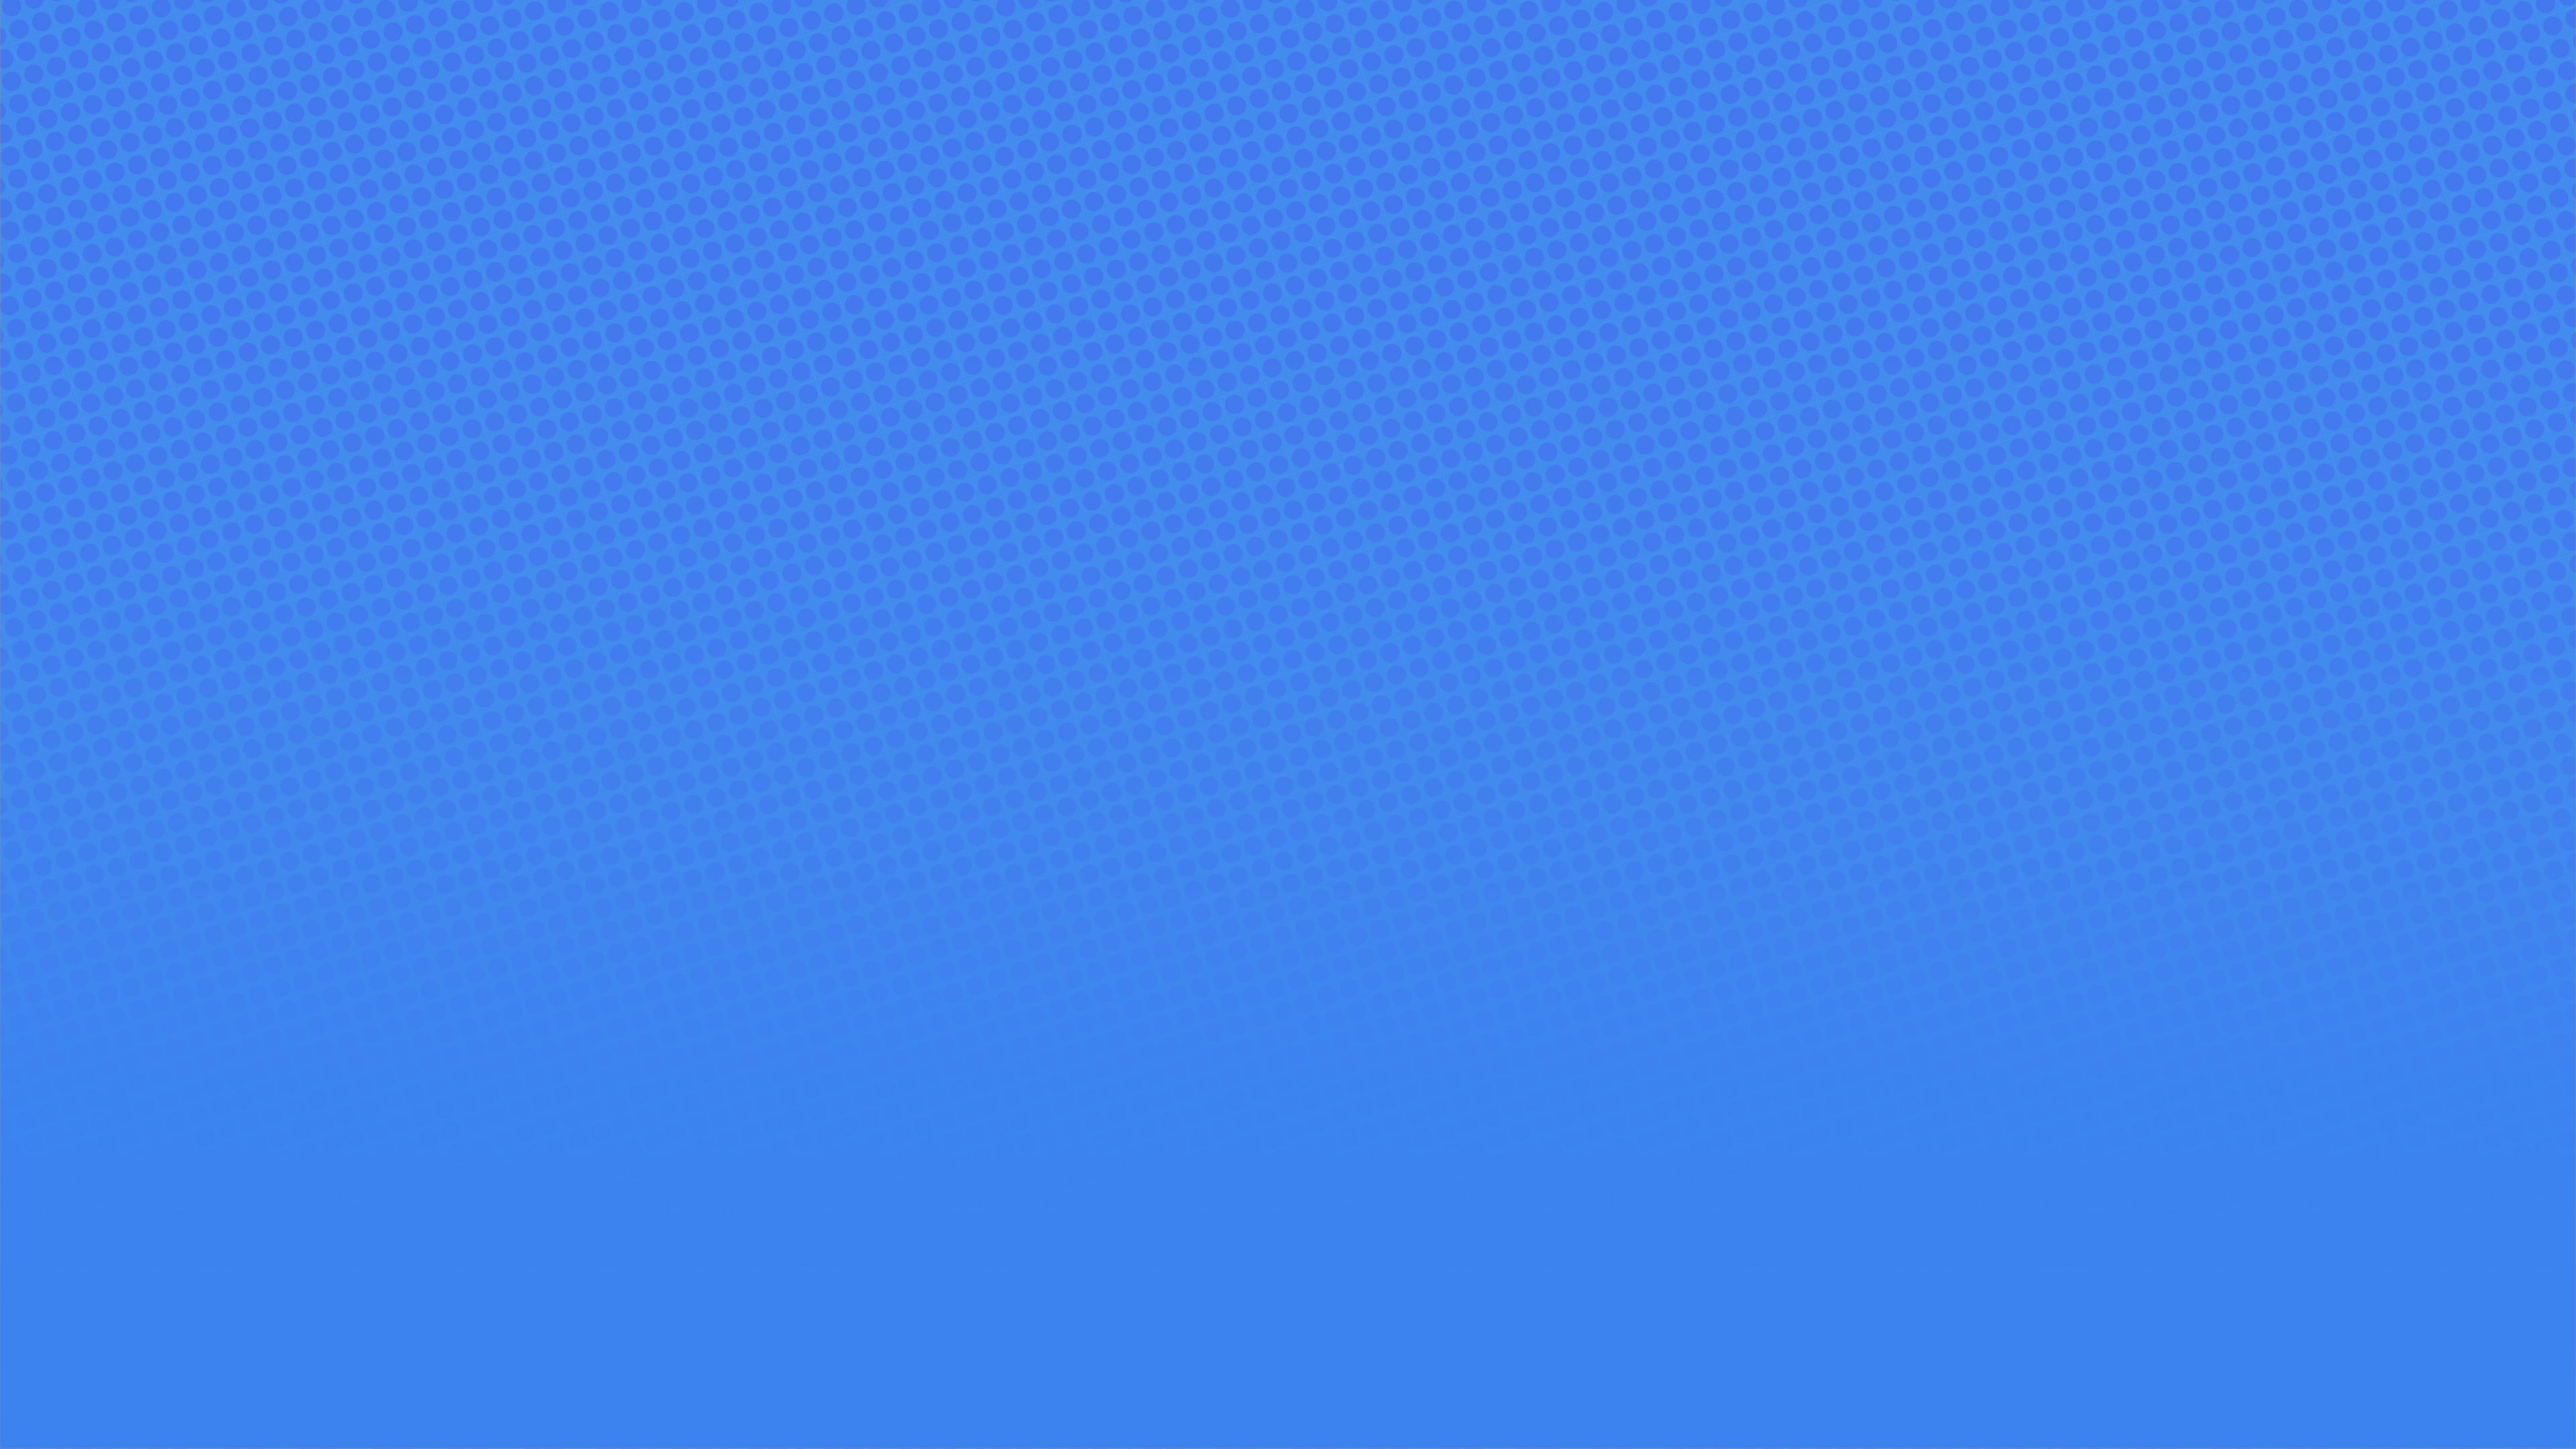 blue surface, polka dots, gradient, soft gradient , simple, simple background